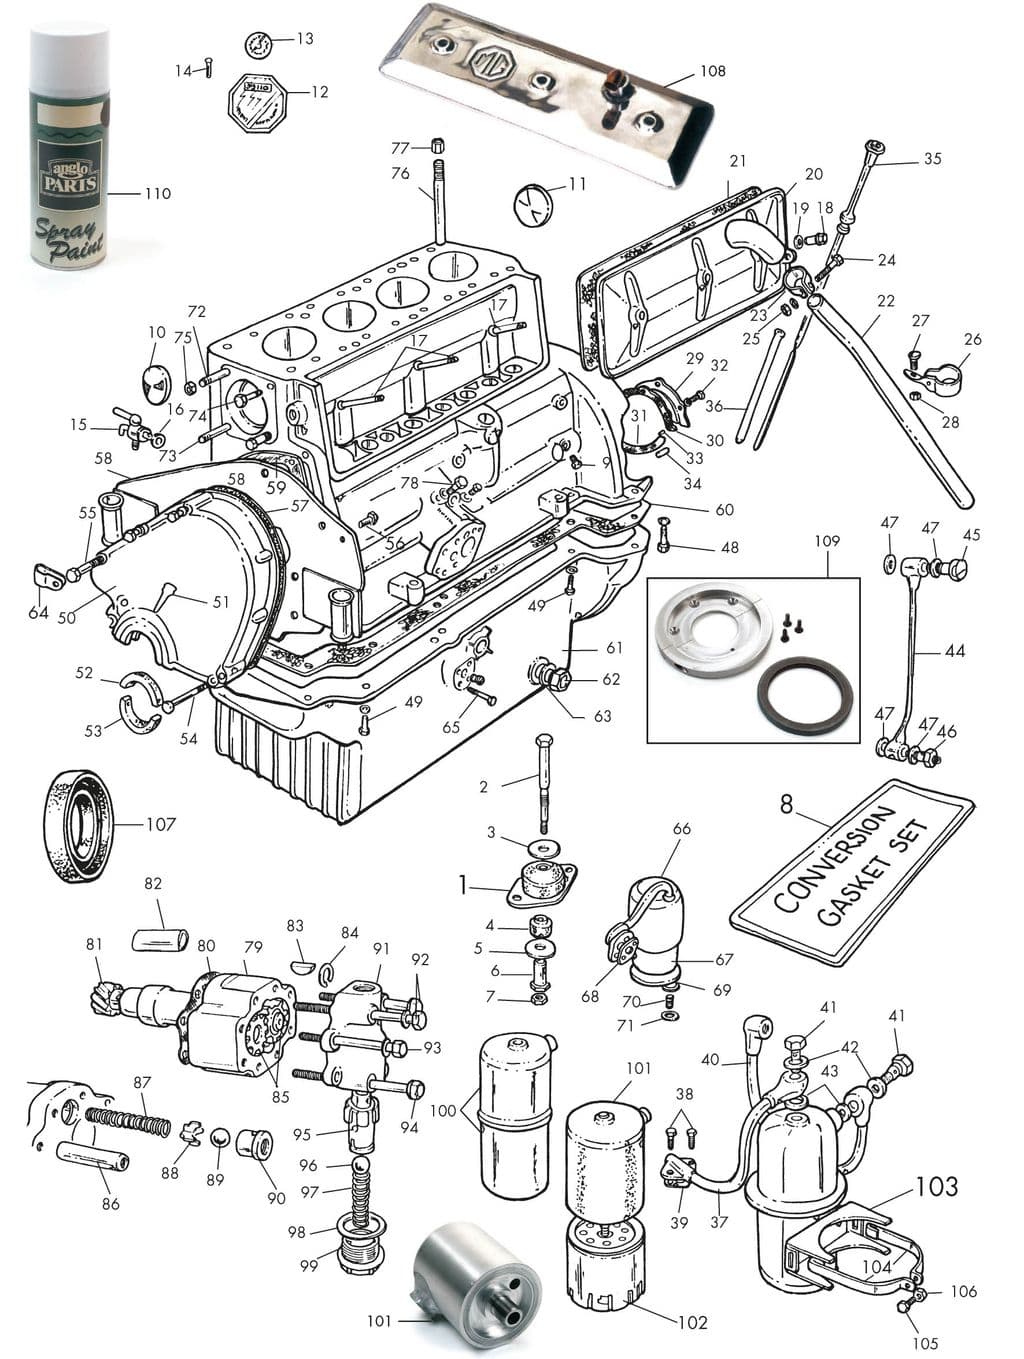 MGTC 1945-1949 - Oil pumps | Webshop Anglo Parts - Engine block & oil system - 1